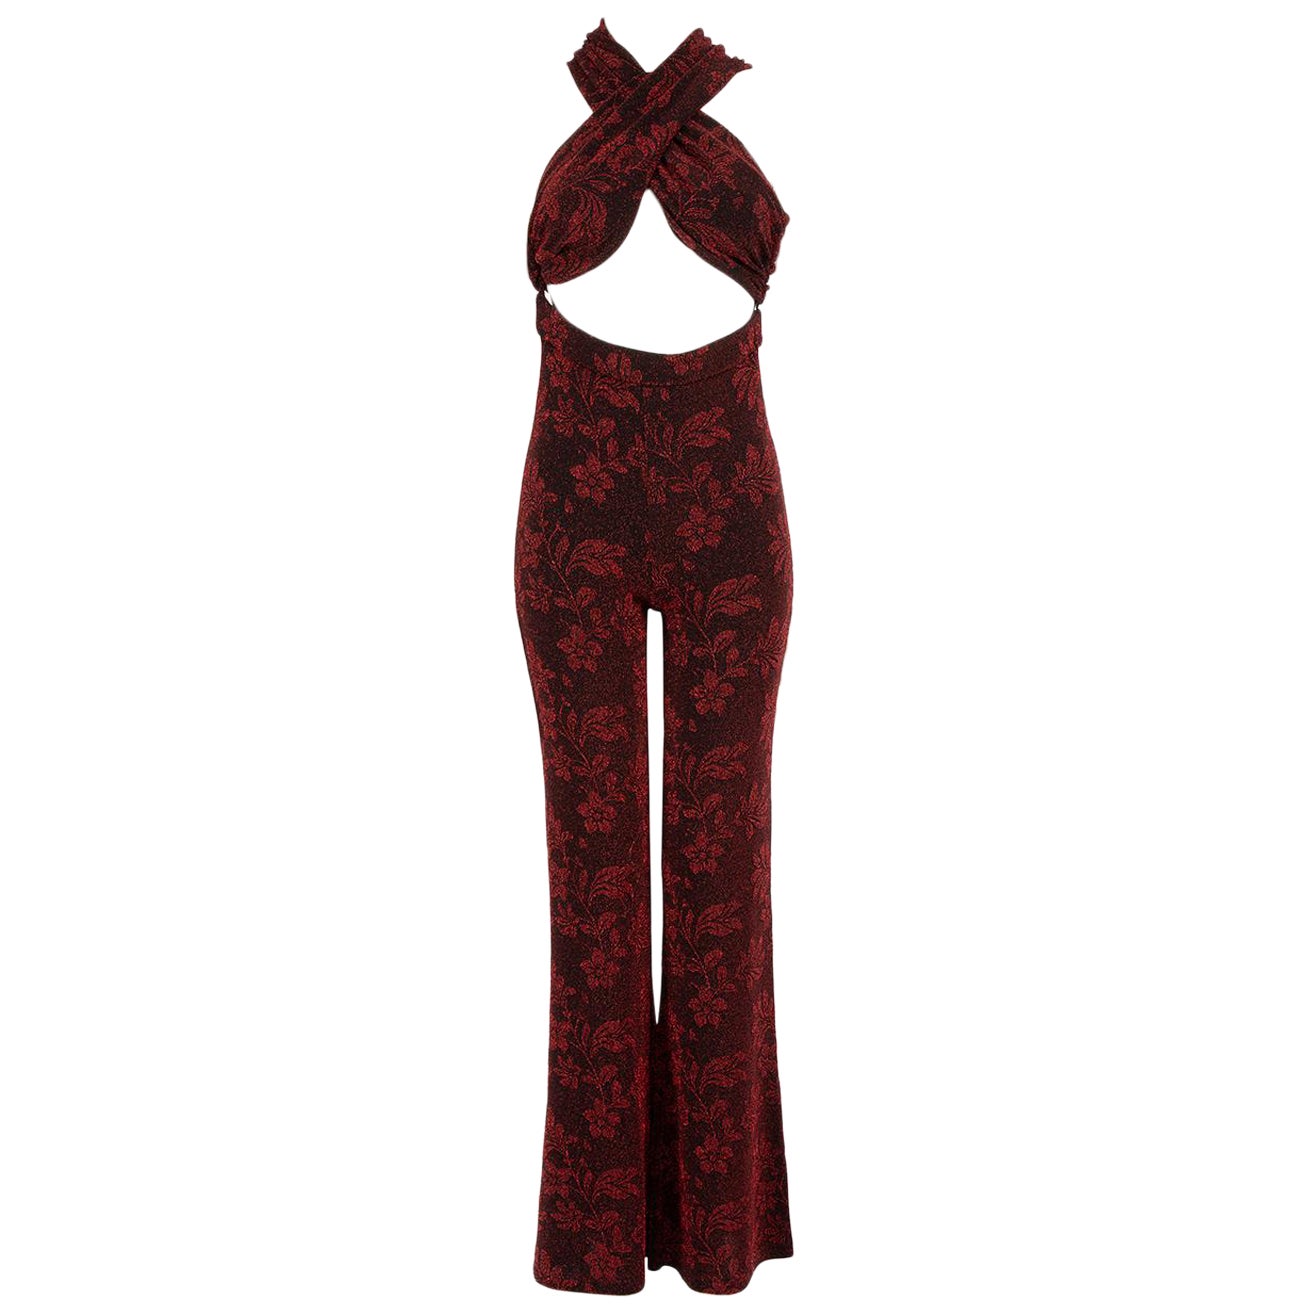  House of Harlow 1960 x Revolve Red Floral Jacquard Jumpsuit Size S For Sale